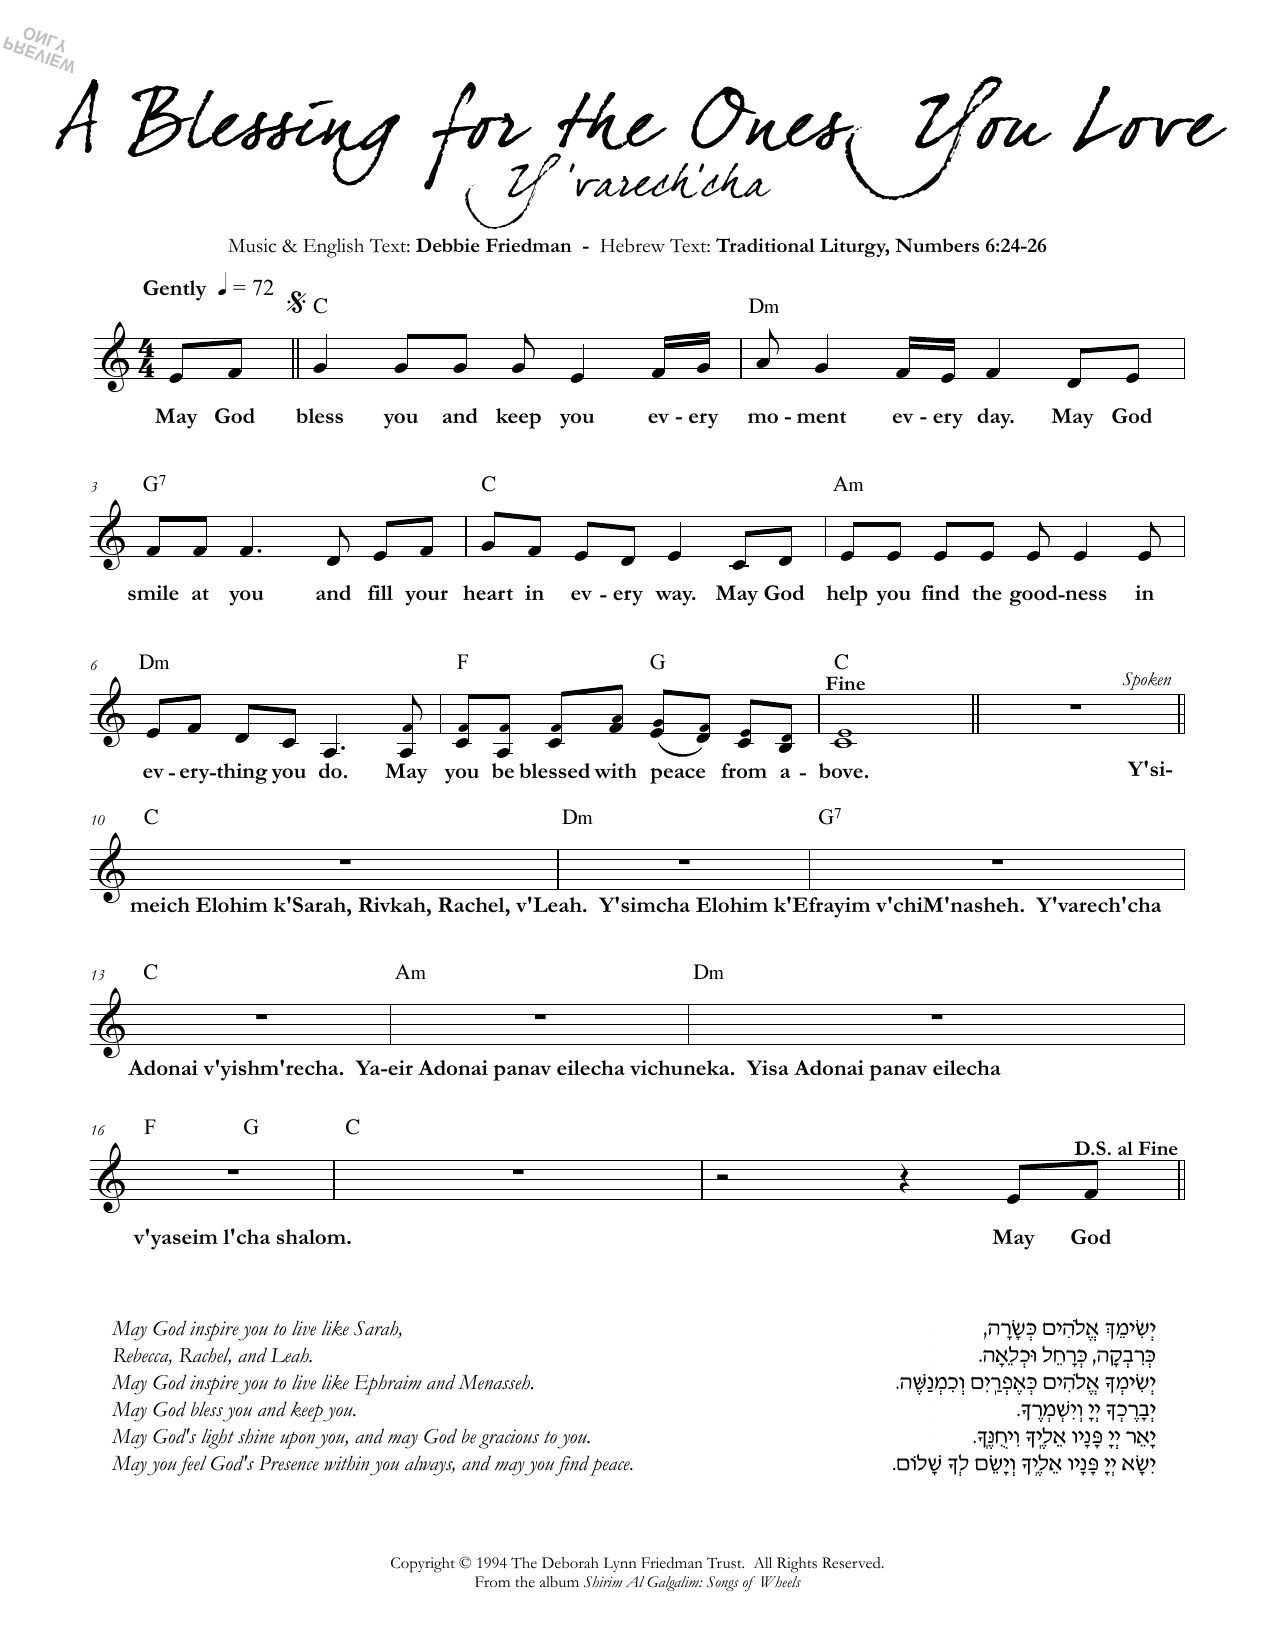 Download Debbie Friedman A Blessing for the Ones You Love Sheet Music